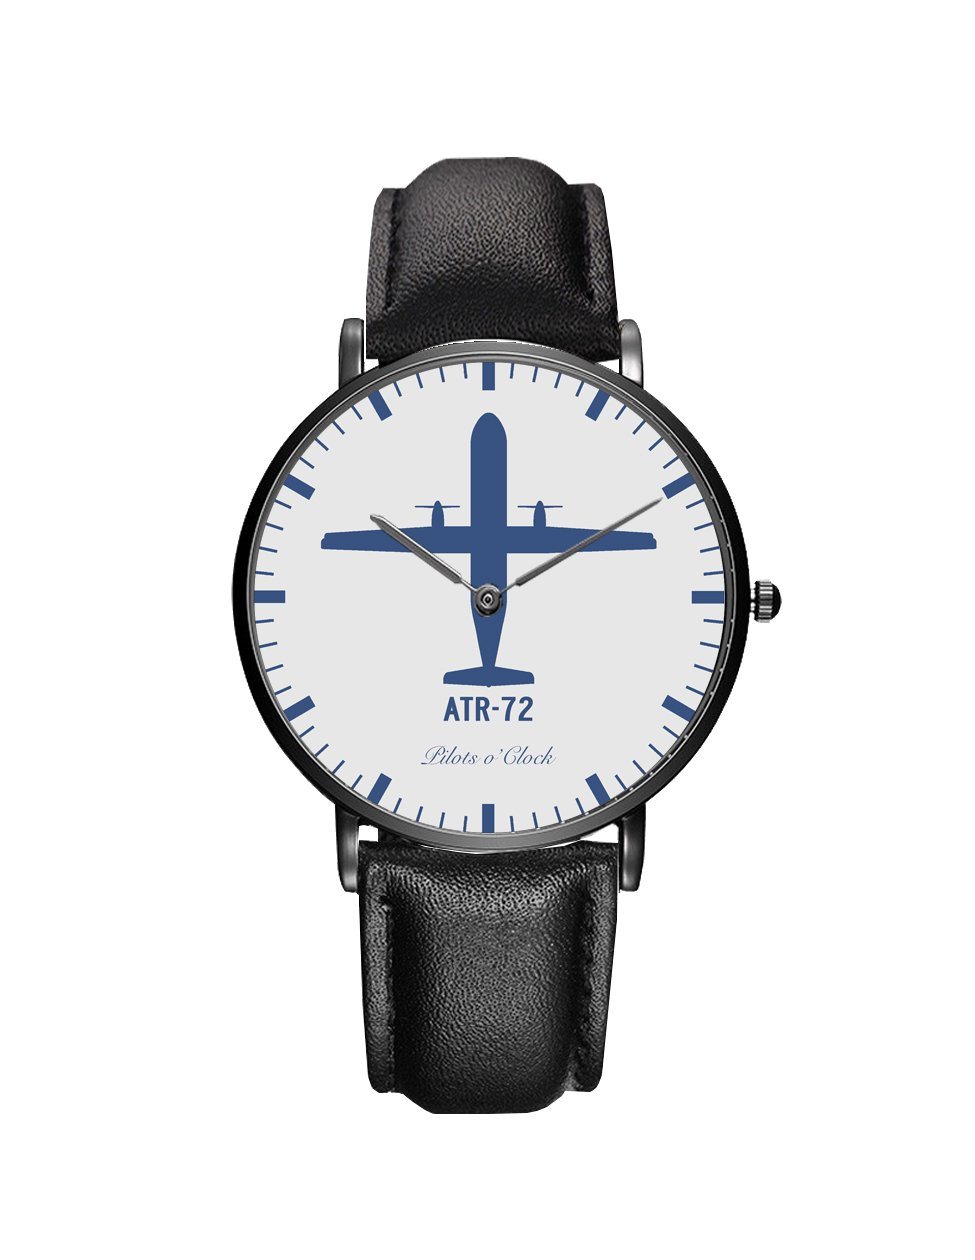 ATR-72 Leather Strap Watches Pilot Eyes Store Black & Black Leather Strap 